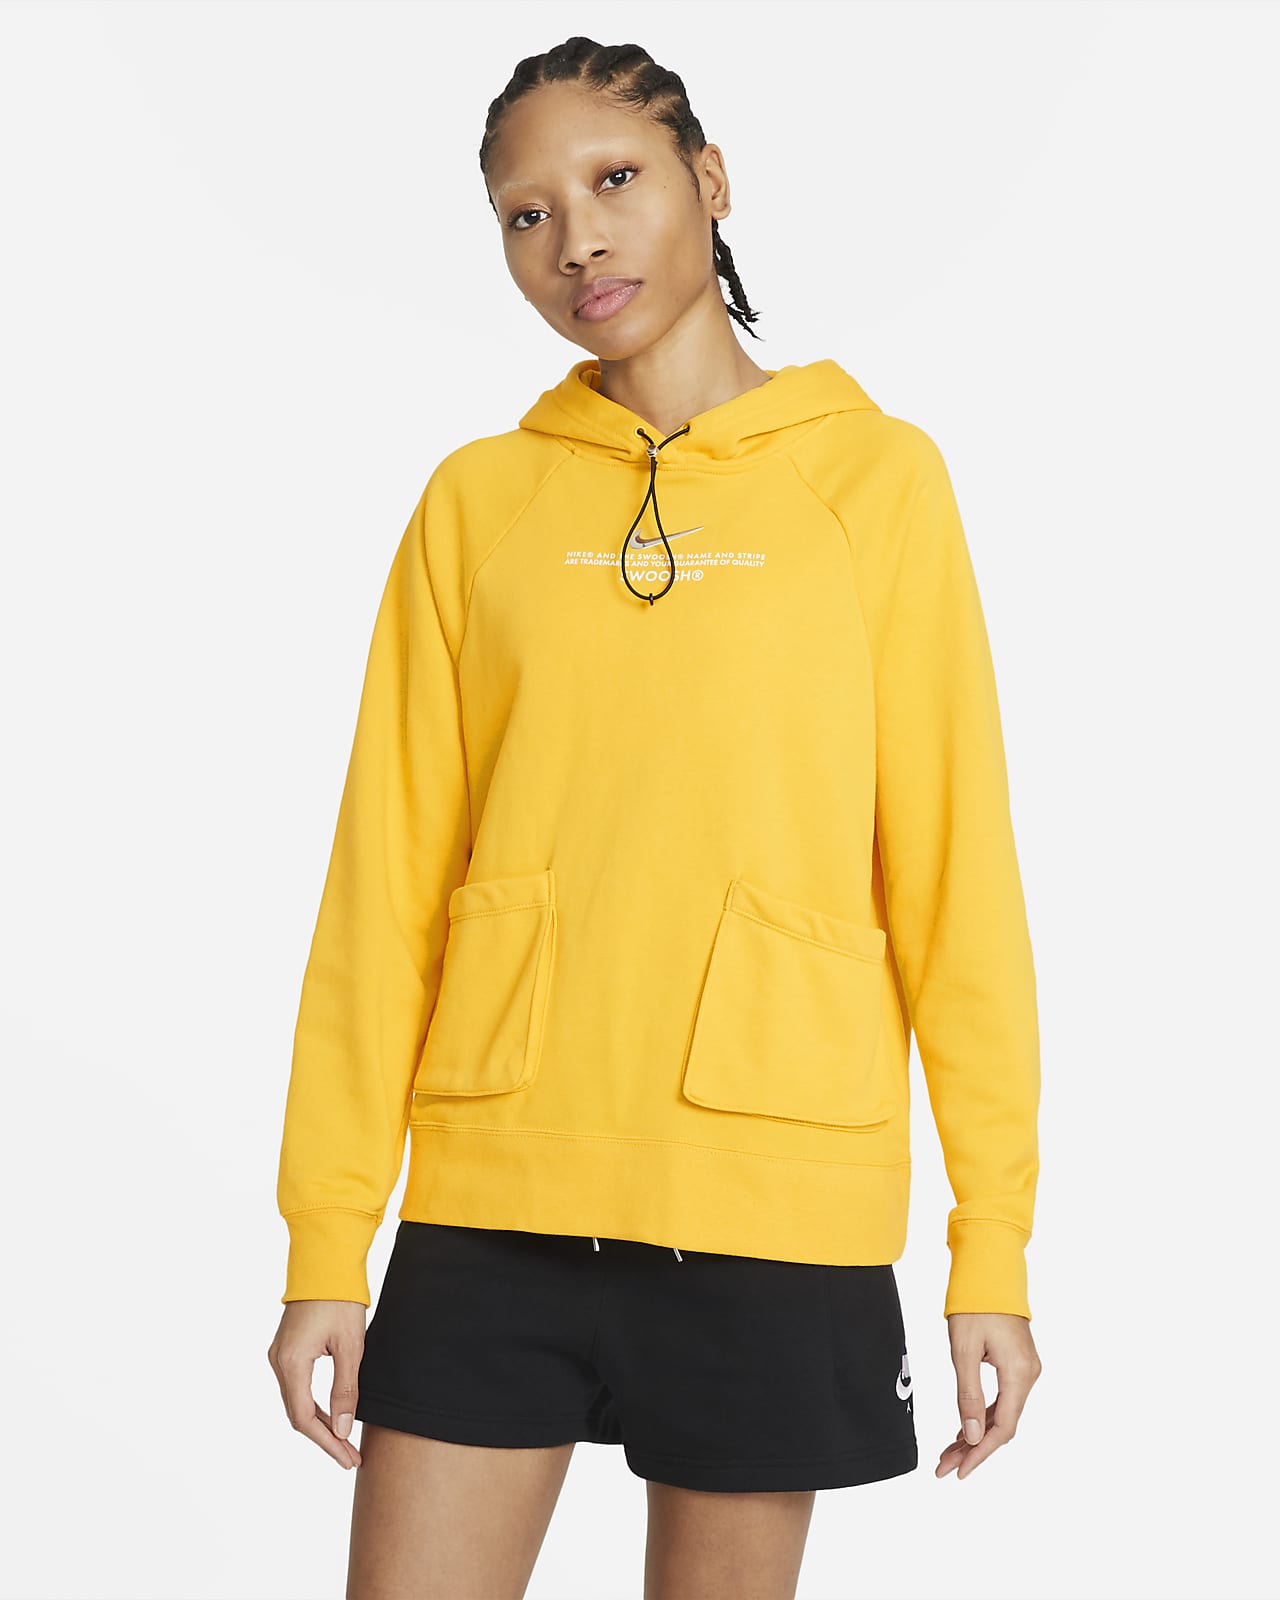 nike french terry hoodie